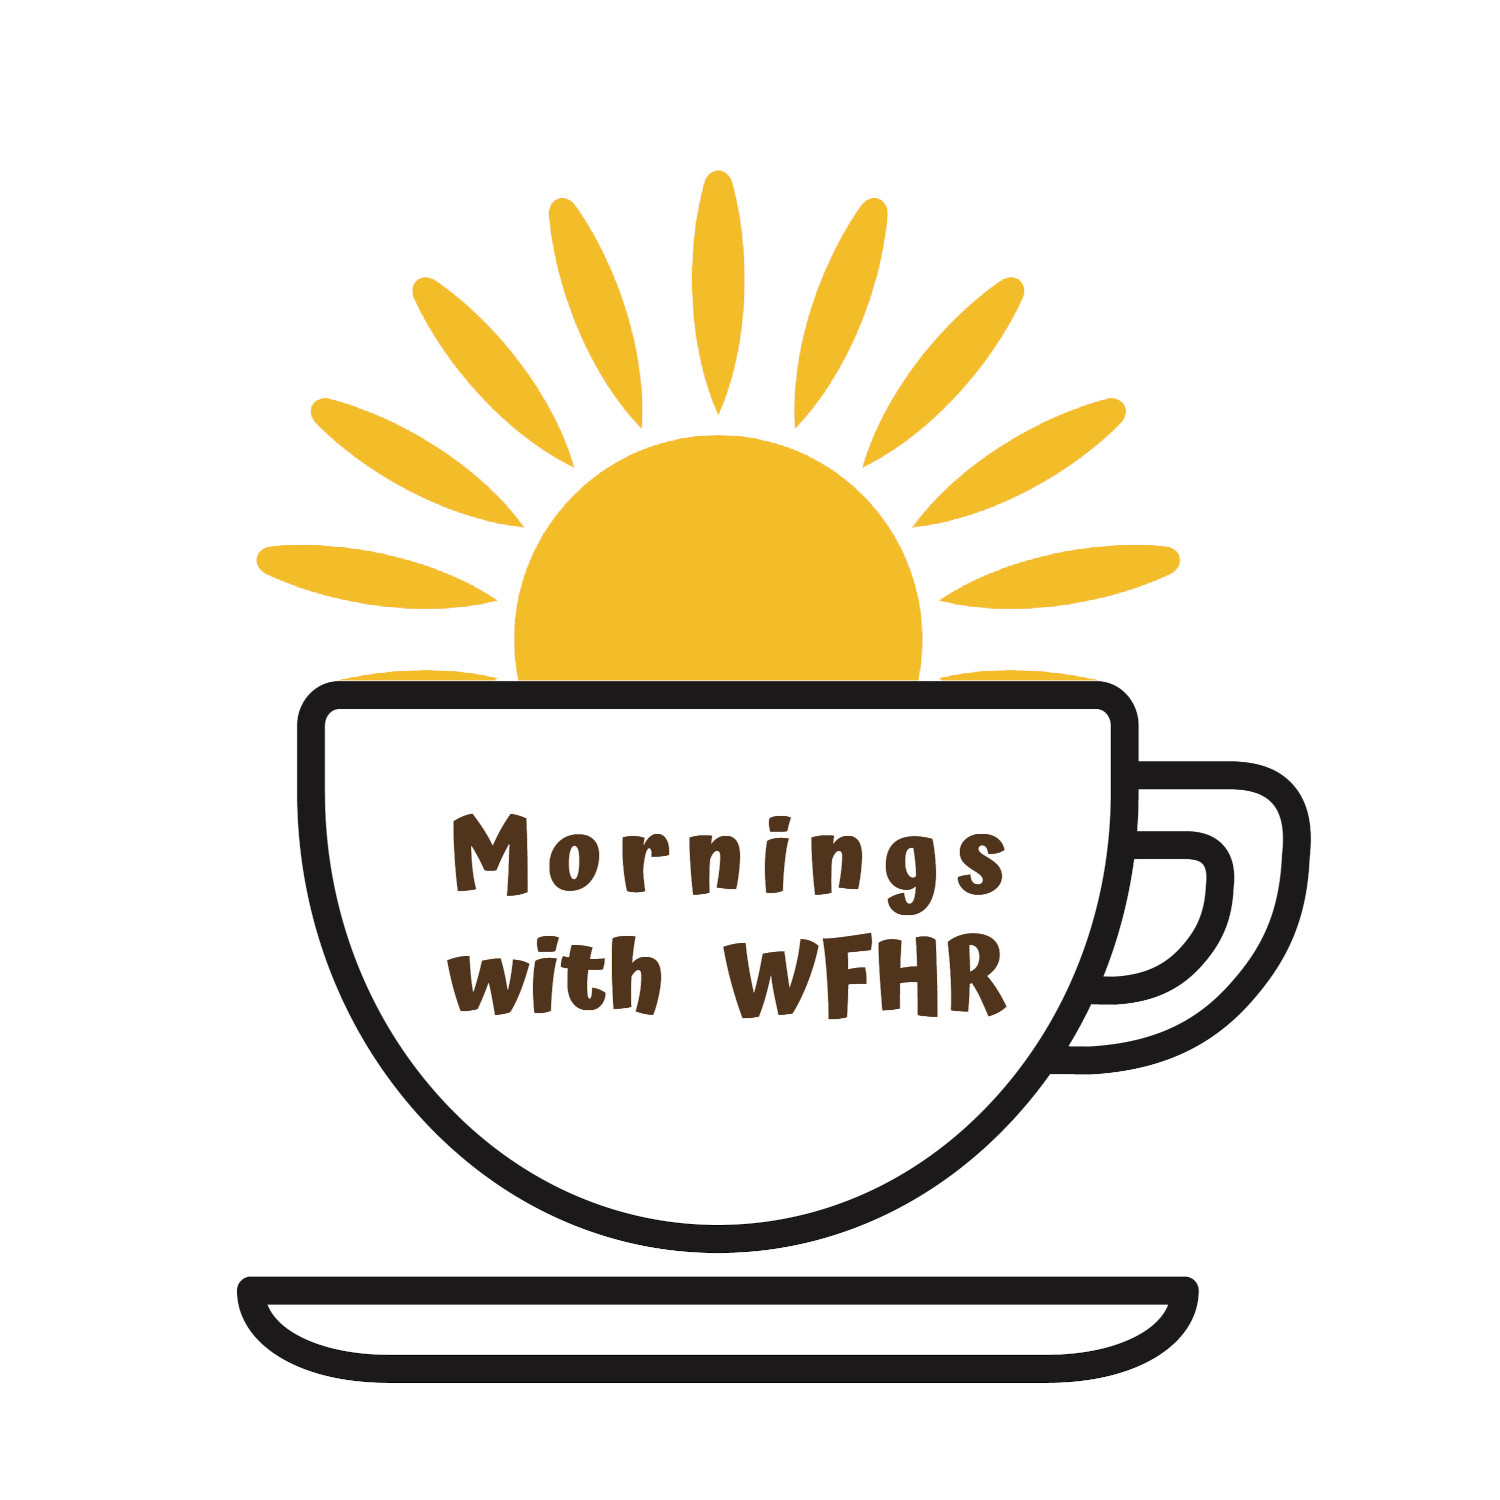 Mornings with WFHR